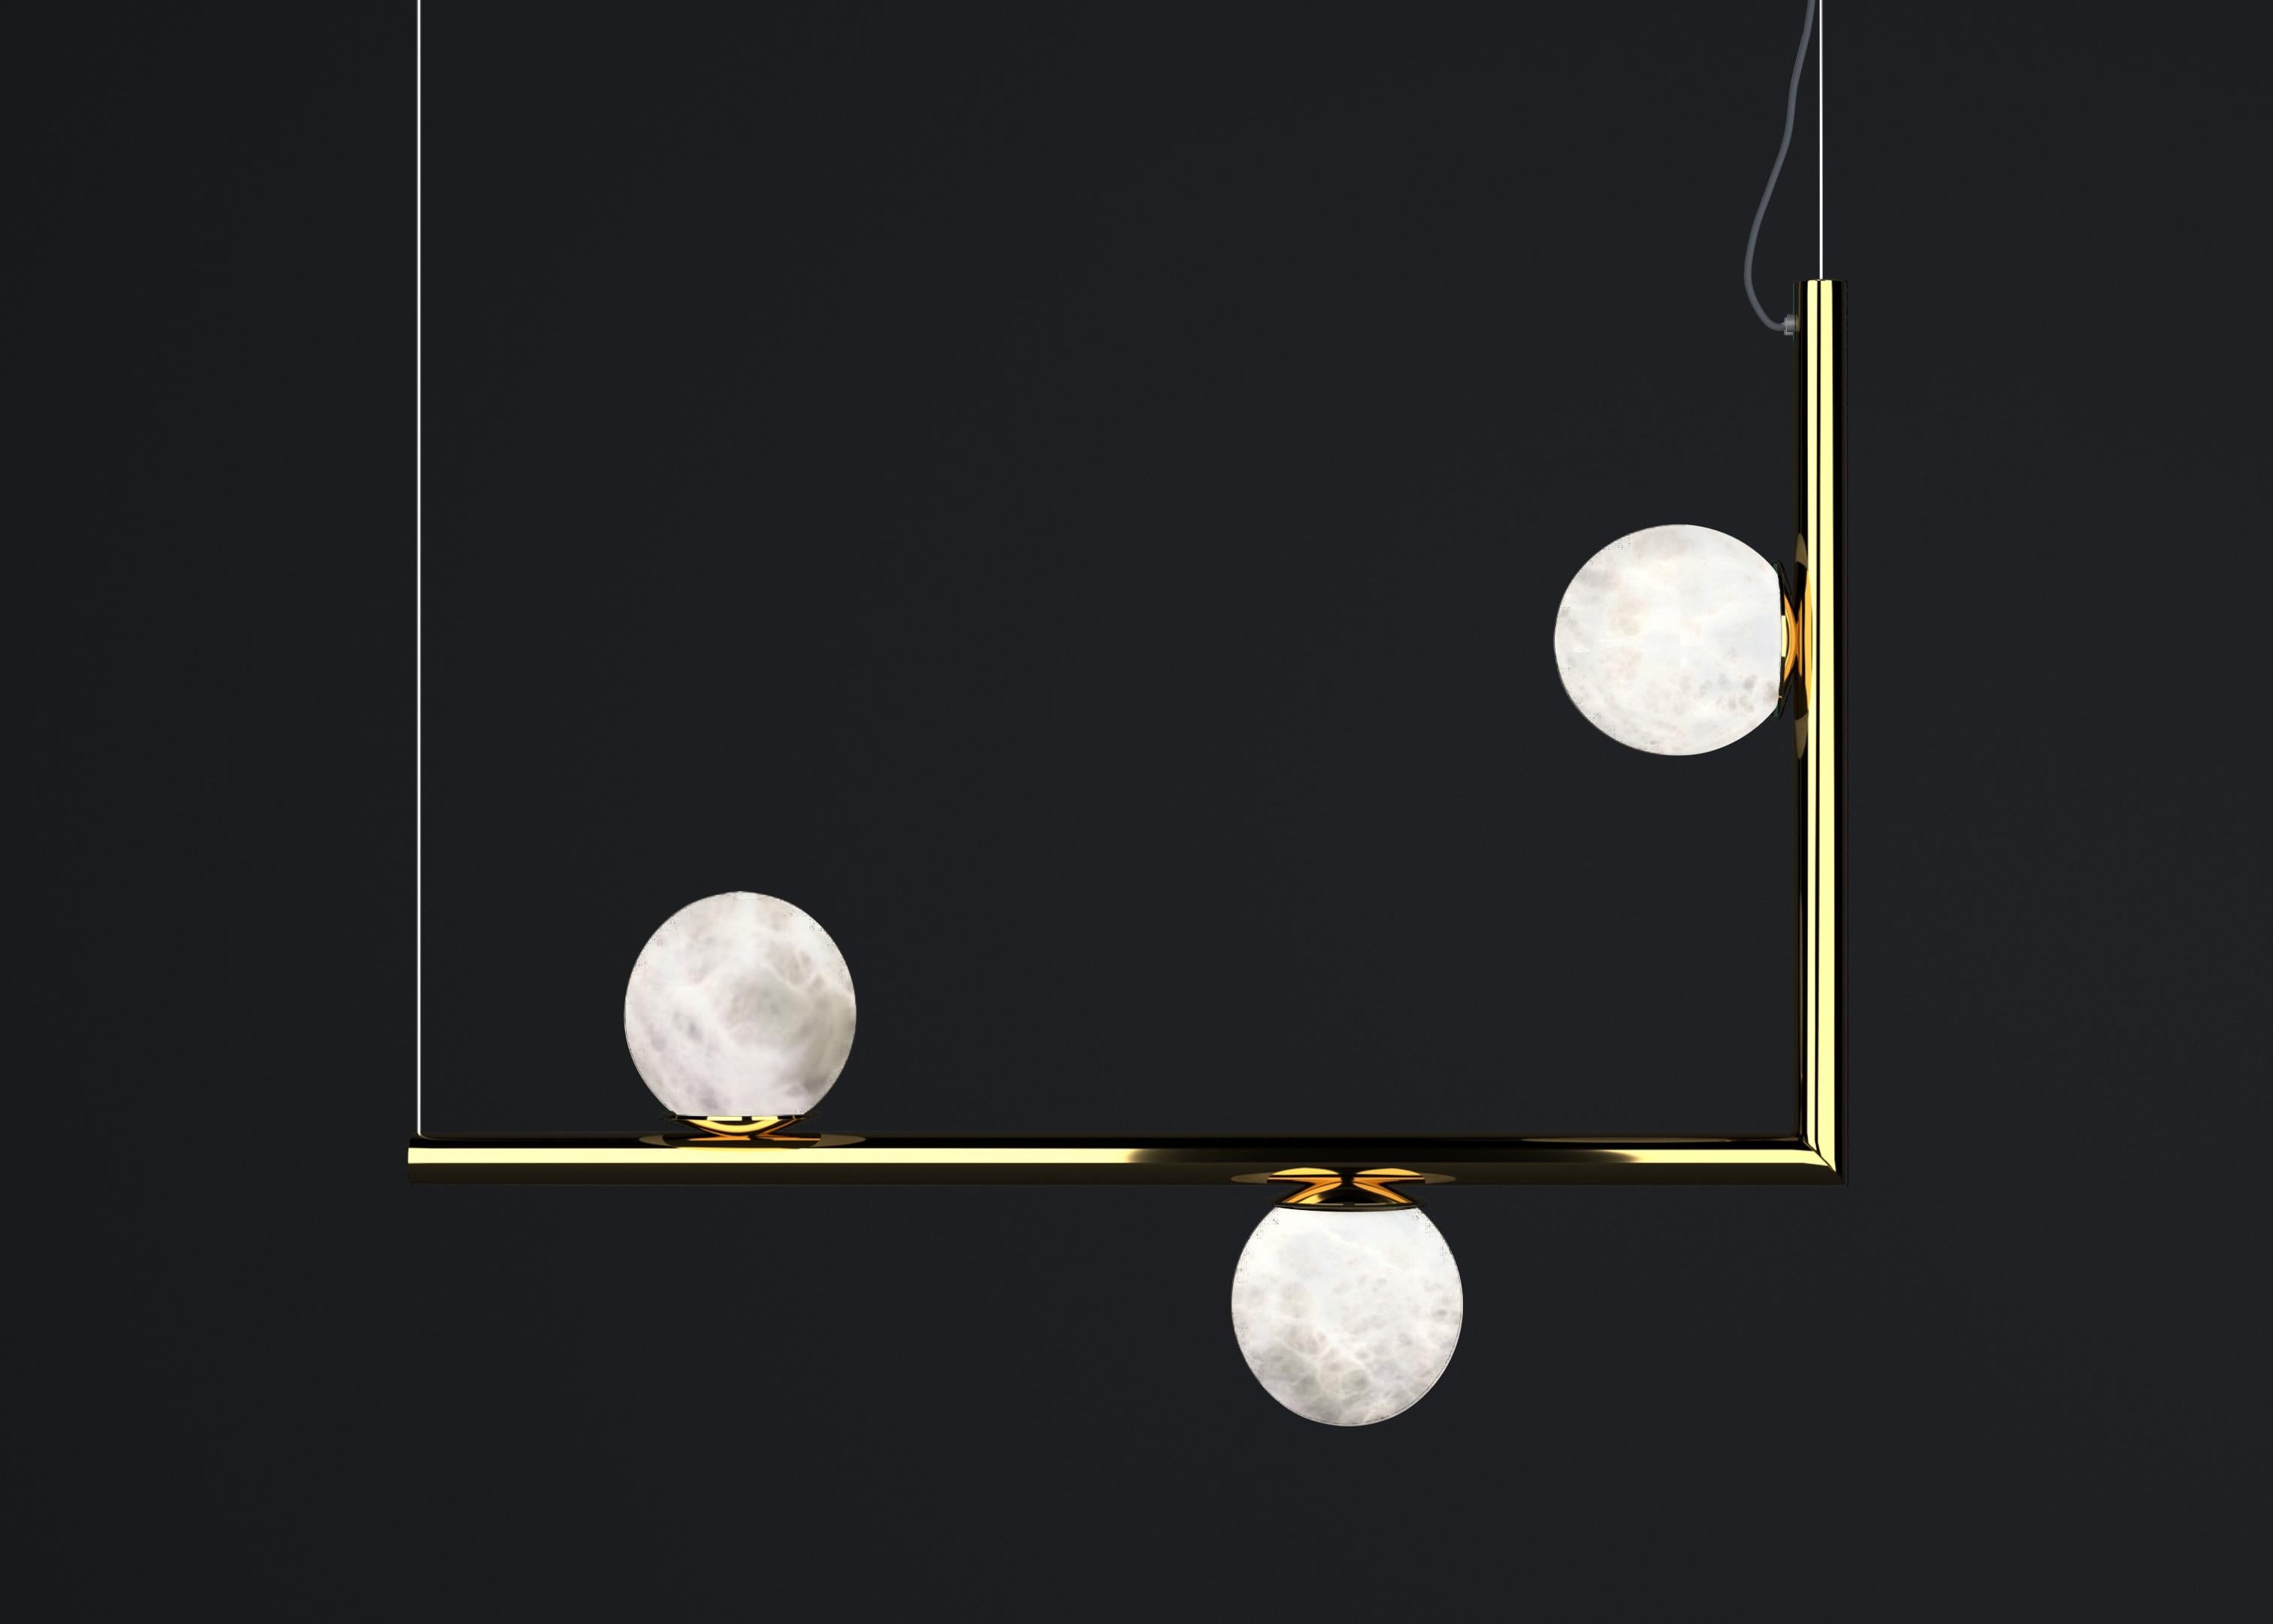 Ofione 1 Shiny Gold Metal Pendant Lamp by Alabastro Italiano
Dimensions: D 15 x W 85 x H 64 cm.
Materials: White alabaster and metal.

Available in different finishes: Shiny Silver, Bronze, Brushed Brass, Ruggine of Florence, Brushed Burnished,